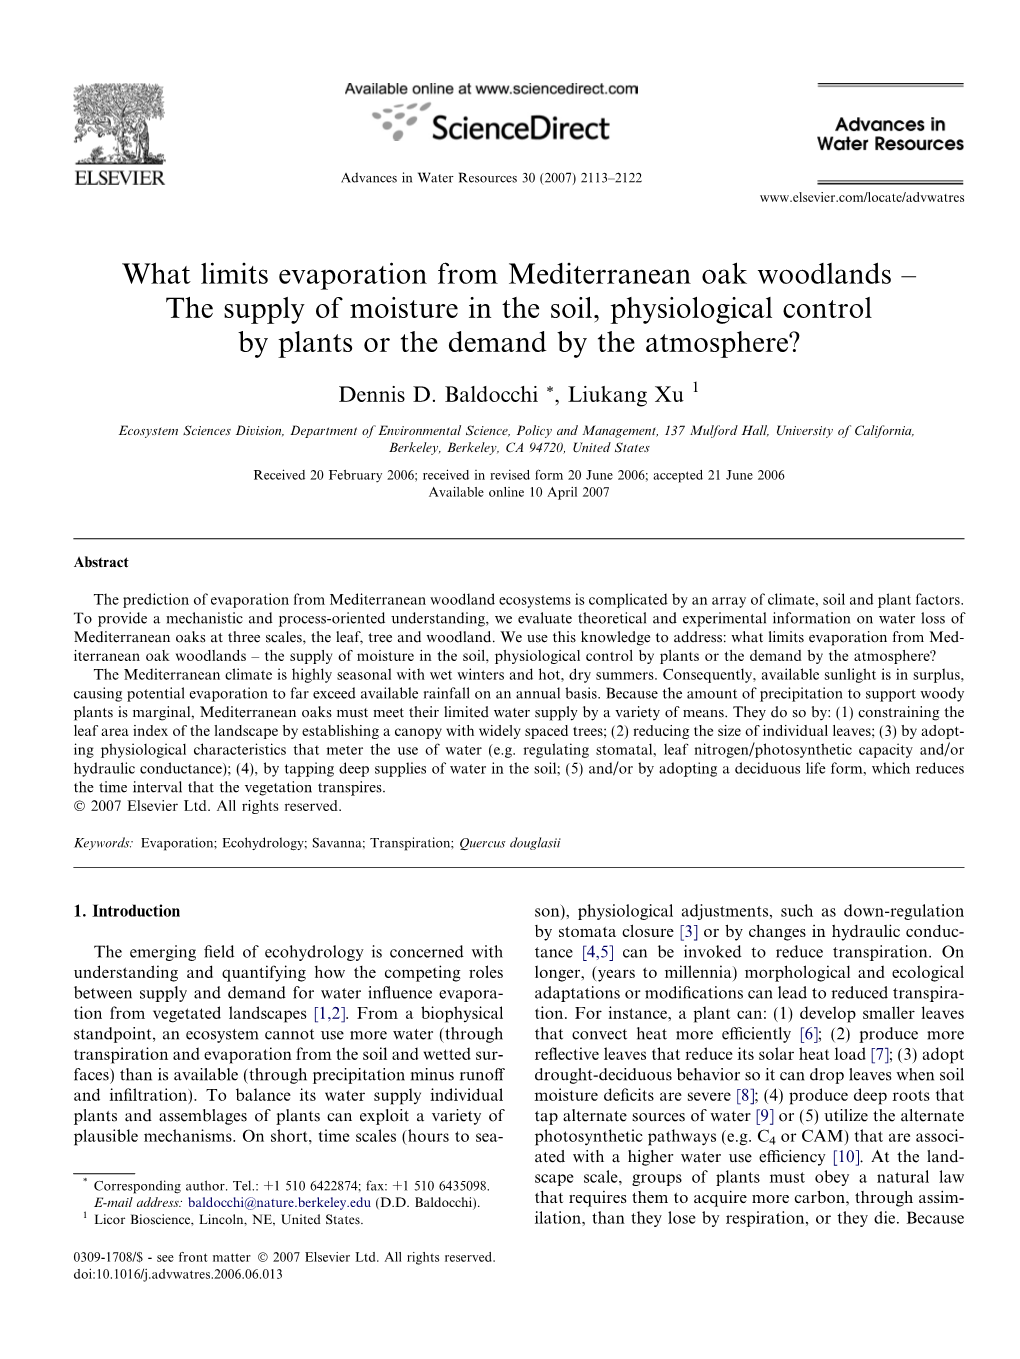 What Limits Evaporation from Mediterranean Oak Woodlands – the Supply of Moisture in the Soil, Physiological Control by Plants Or the Demand by the Atmosphere?